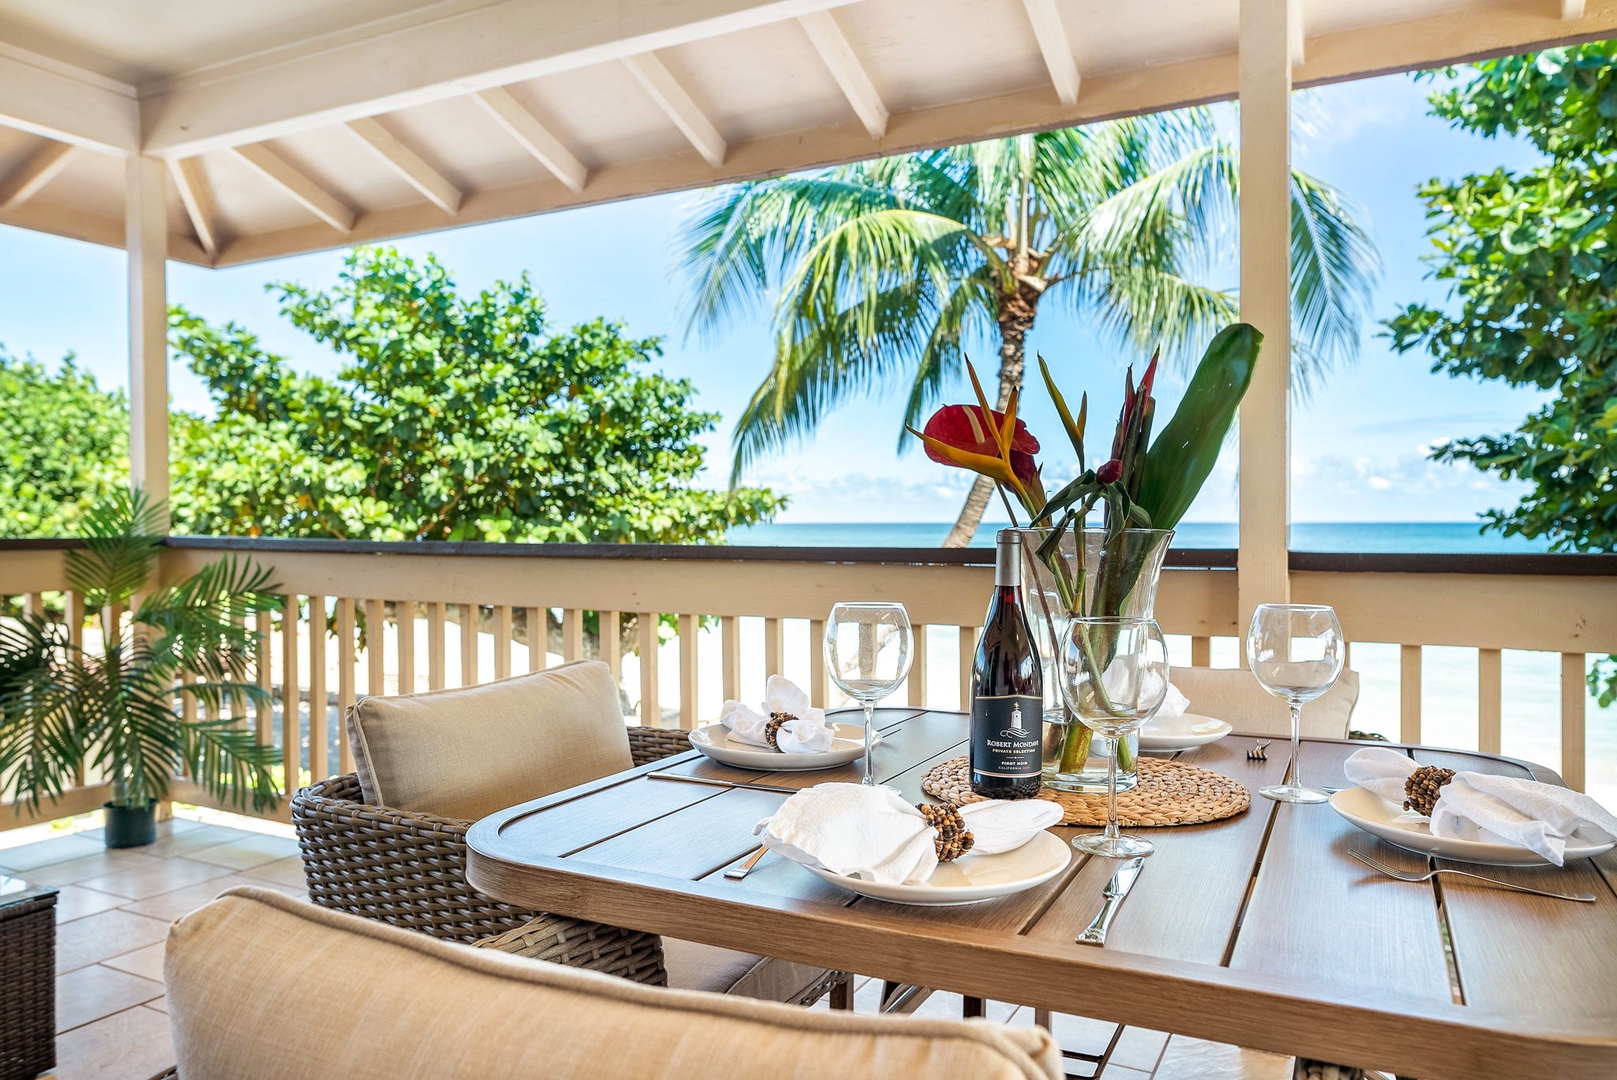 Haleiwa Vacation Rentals, Pikai Hale - Outdoor dining on the covered lanai with beach and ocean views